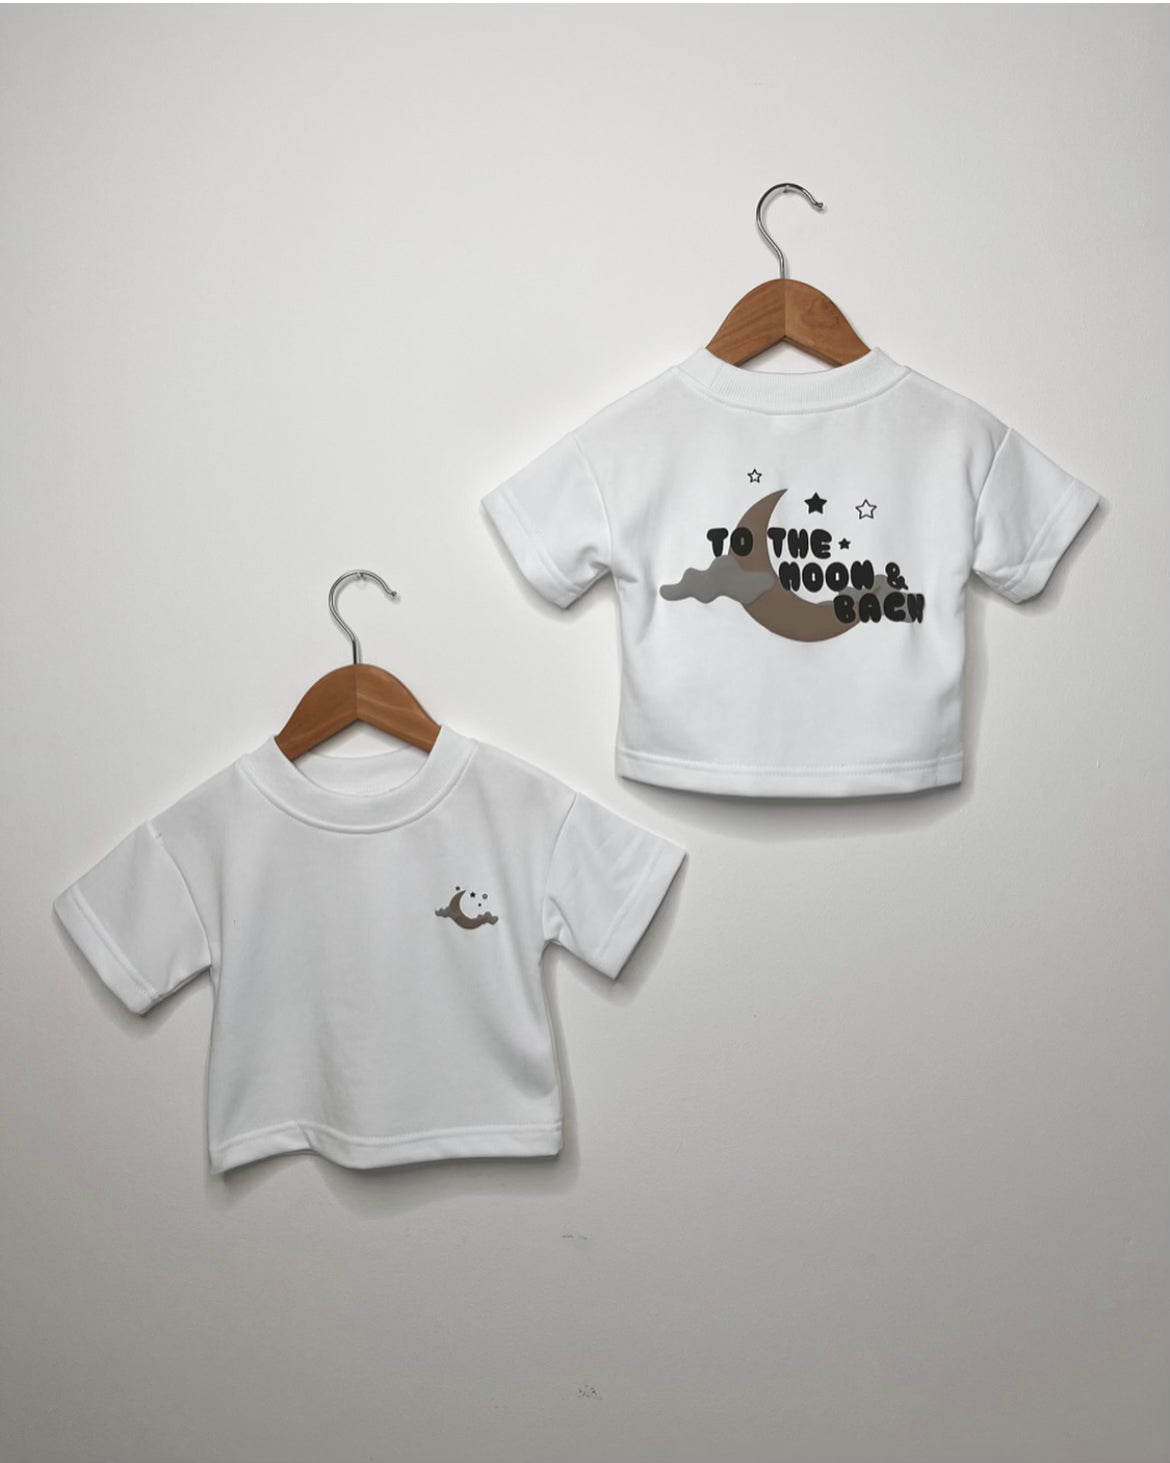 MLBC French Terry White T-Shirt and Shorts Set - To the moon